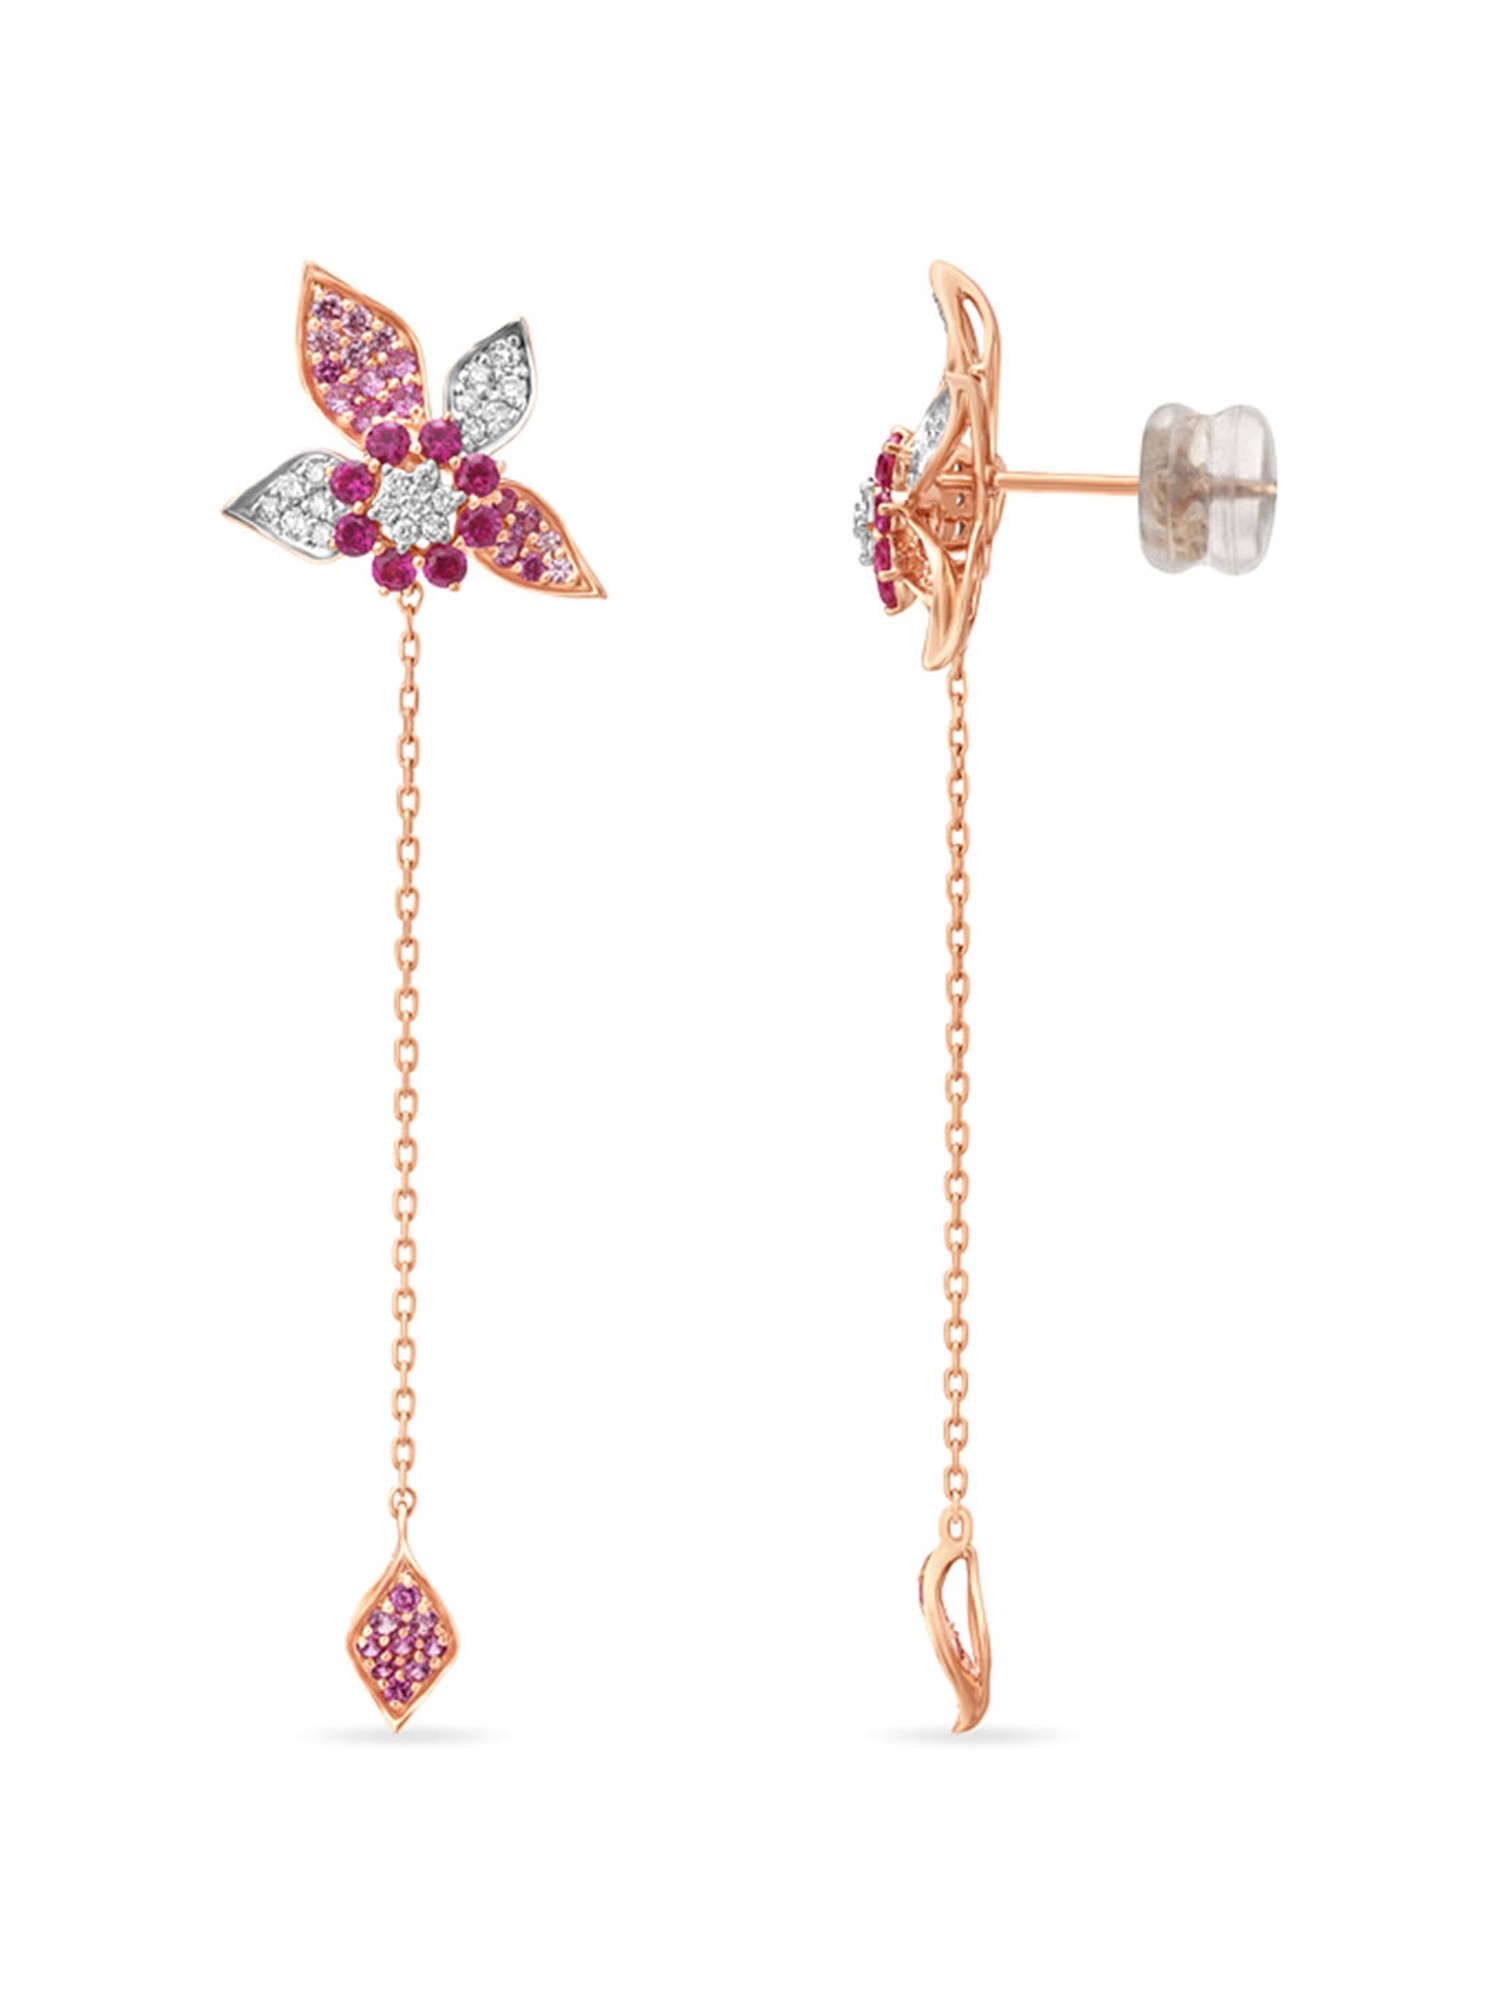 Buy Mia by Tanishq 14k Rose Gold Earrings for Women Online At Best Price   Tata CLiQ